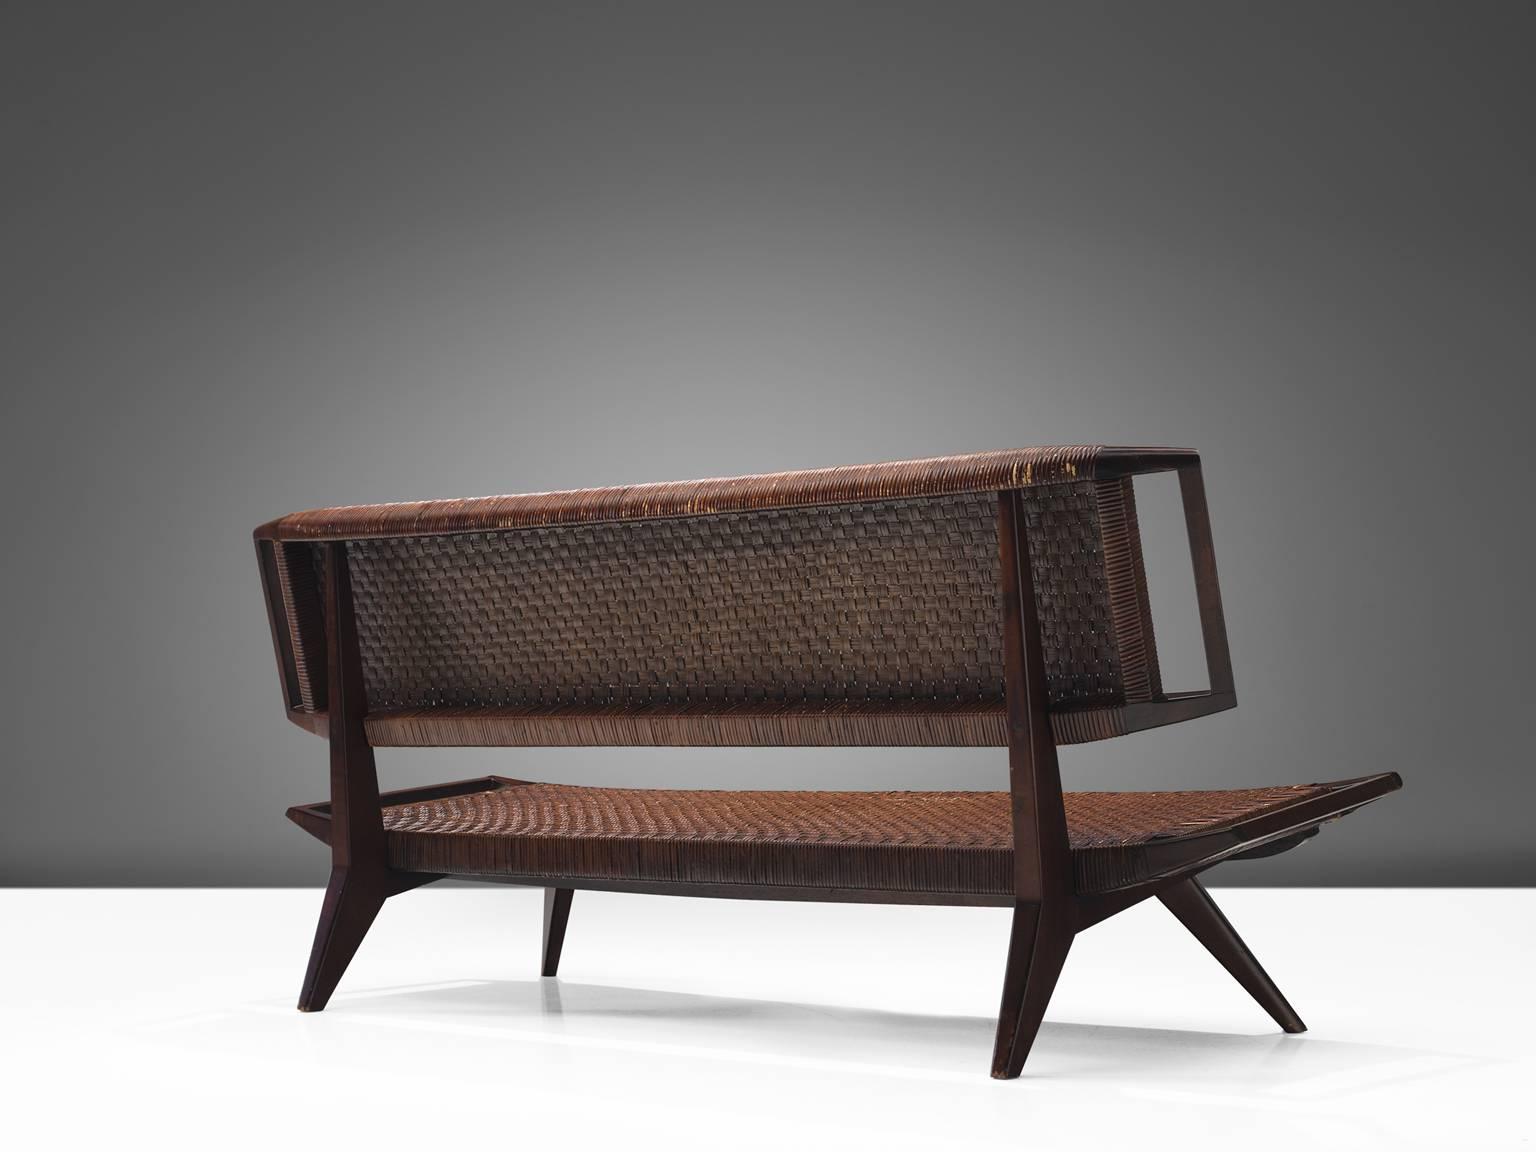 Paul László for Glenn of California, settee, cane and mahogany, United States, 1950.

This sofa by Paul László is designed with a caned back and seat that is in good patinated condition. The legs of the sofa are pointed outwards and feature